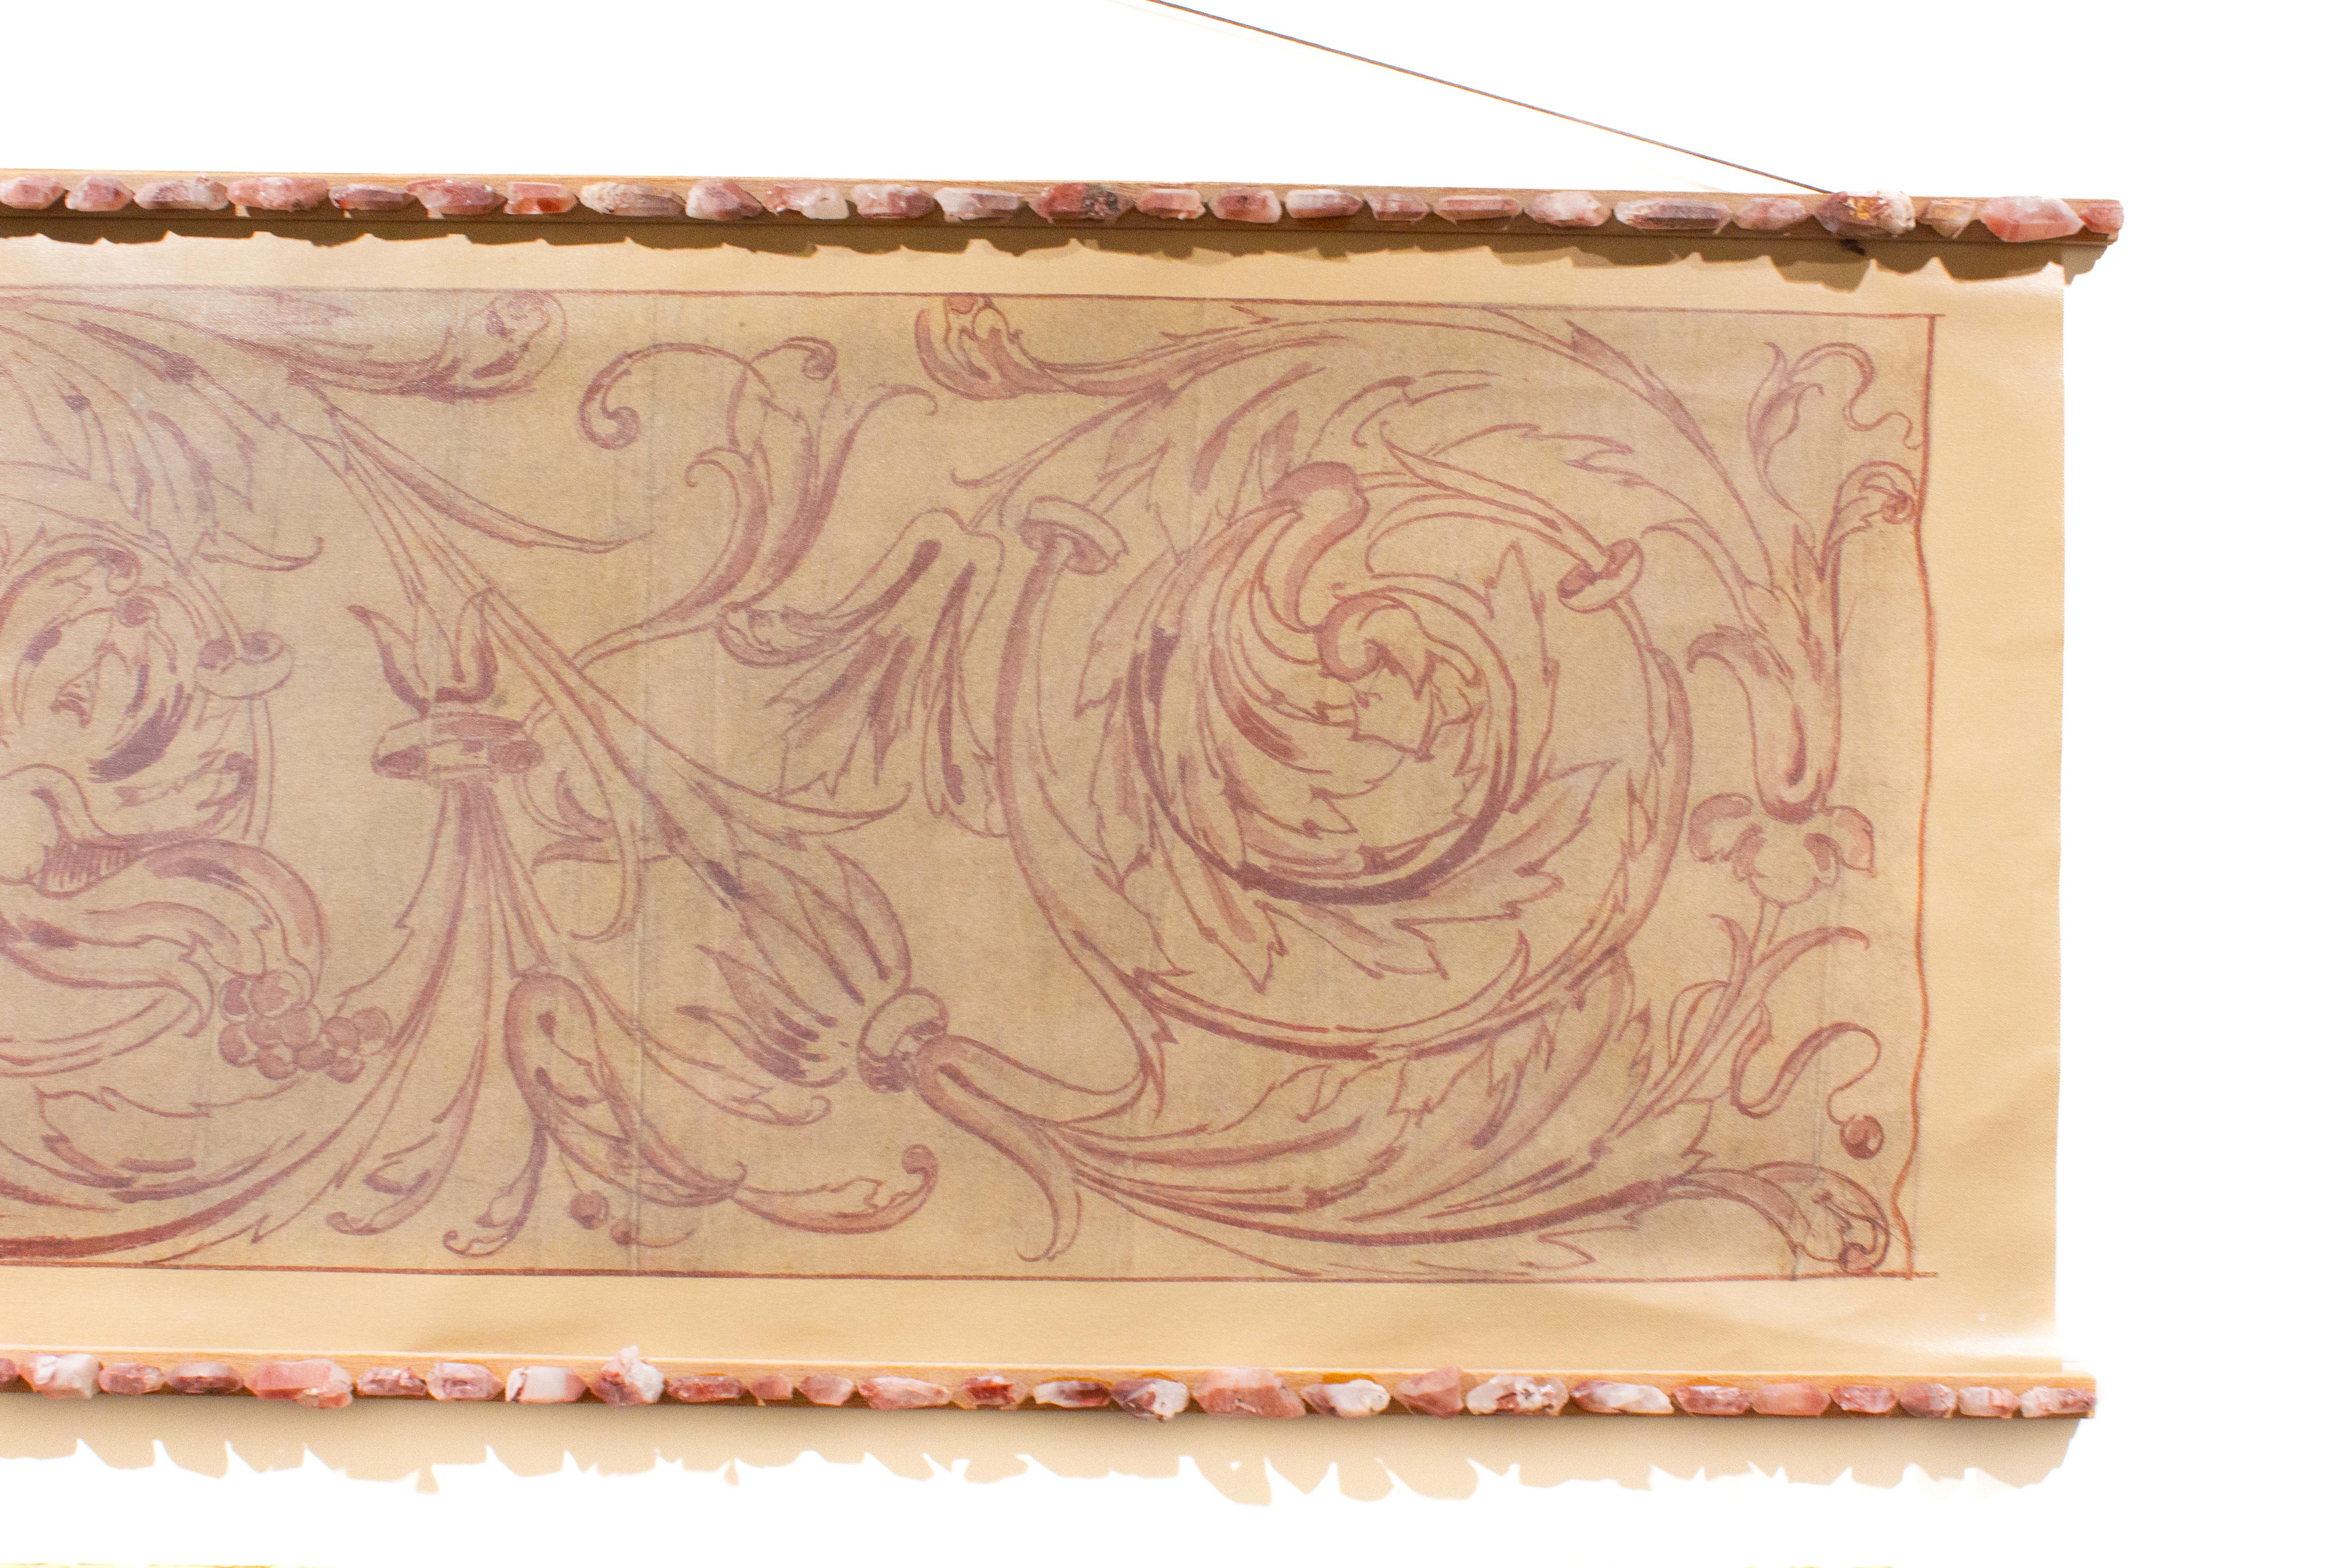 Paper Italian Spolvero Rococo Print on Canvas Framed with Red Phantom Quartz Crystals For Sale